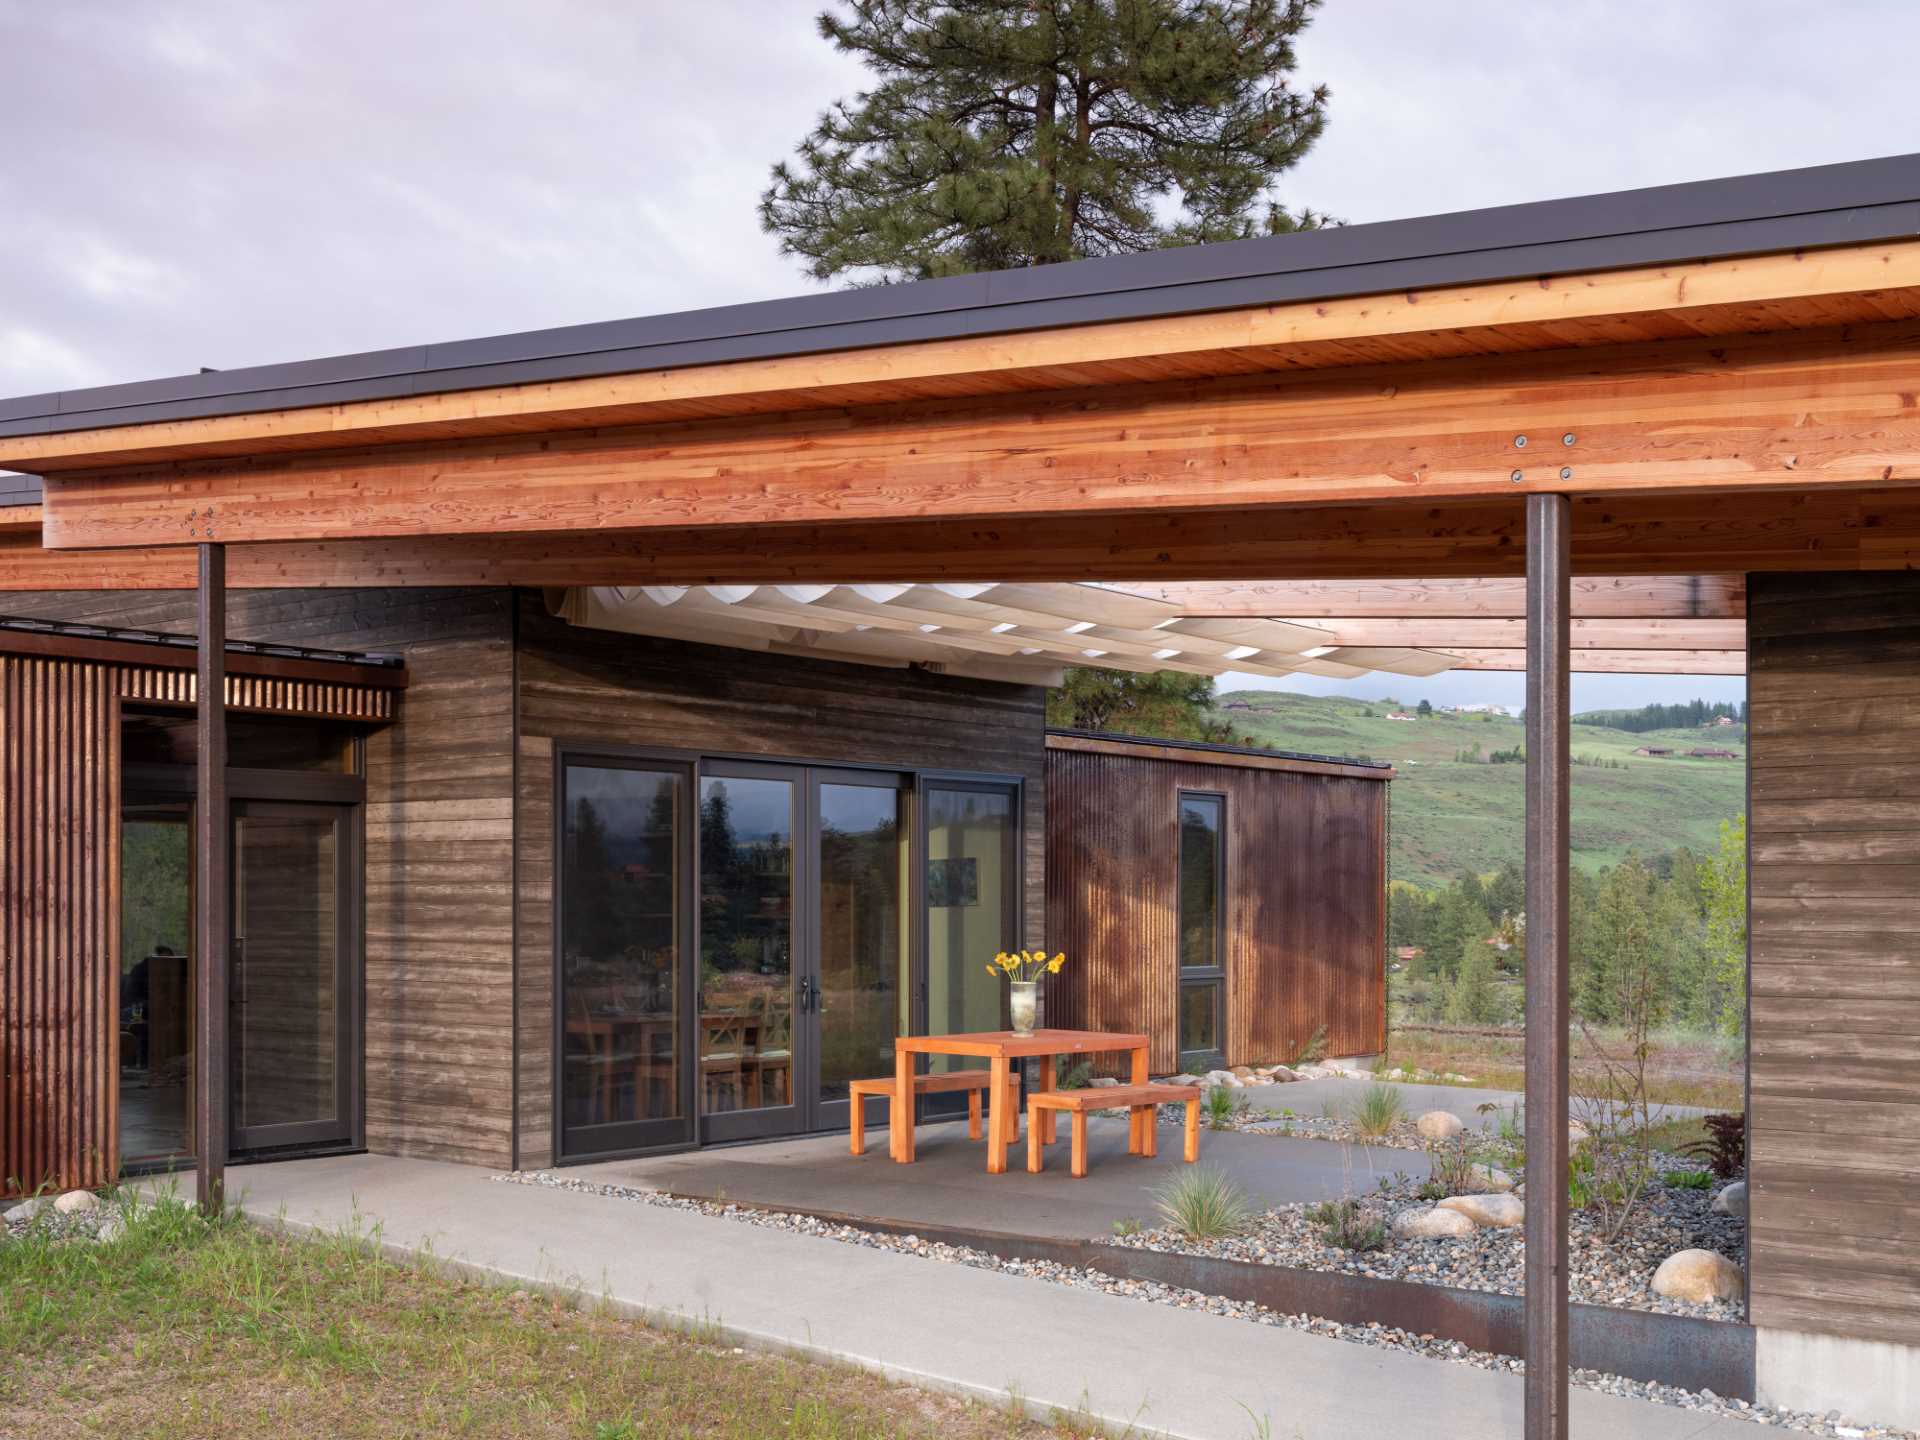 The exposed glulam beams of the roof support retractable awnings, giving the space flexibility and providing additional shade and cooling to the rest of the home.